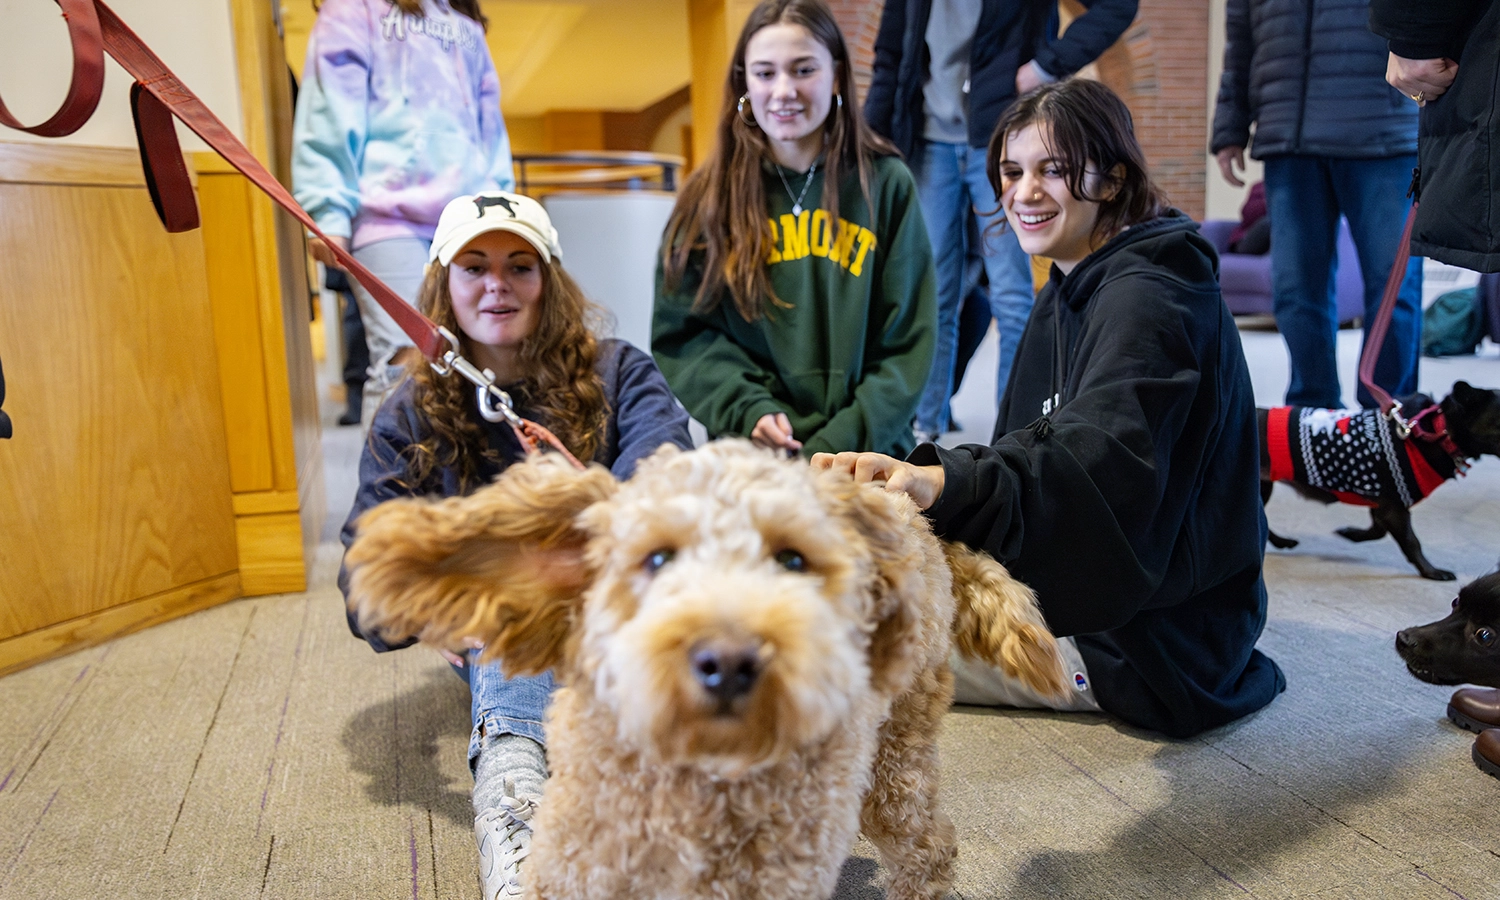 Murphy, a miniature goldendoodle, runs toward the camera while playing with Hannah Lax ‘24, Lydia Rudnick ‘26 and Cecelia Ripley ‘25.